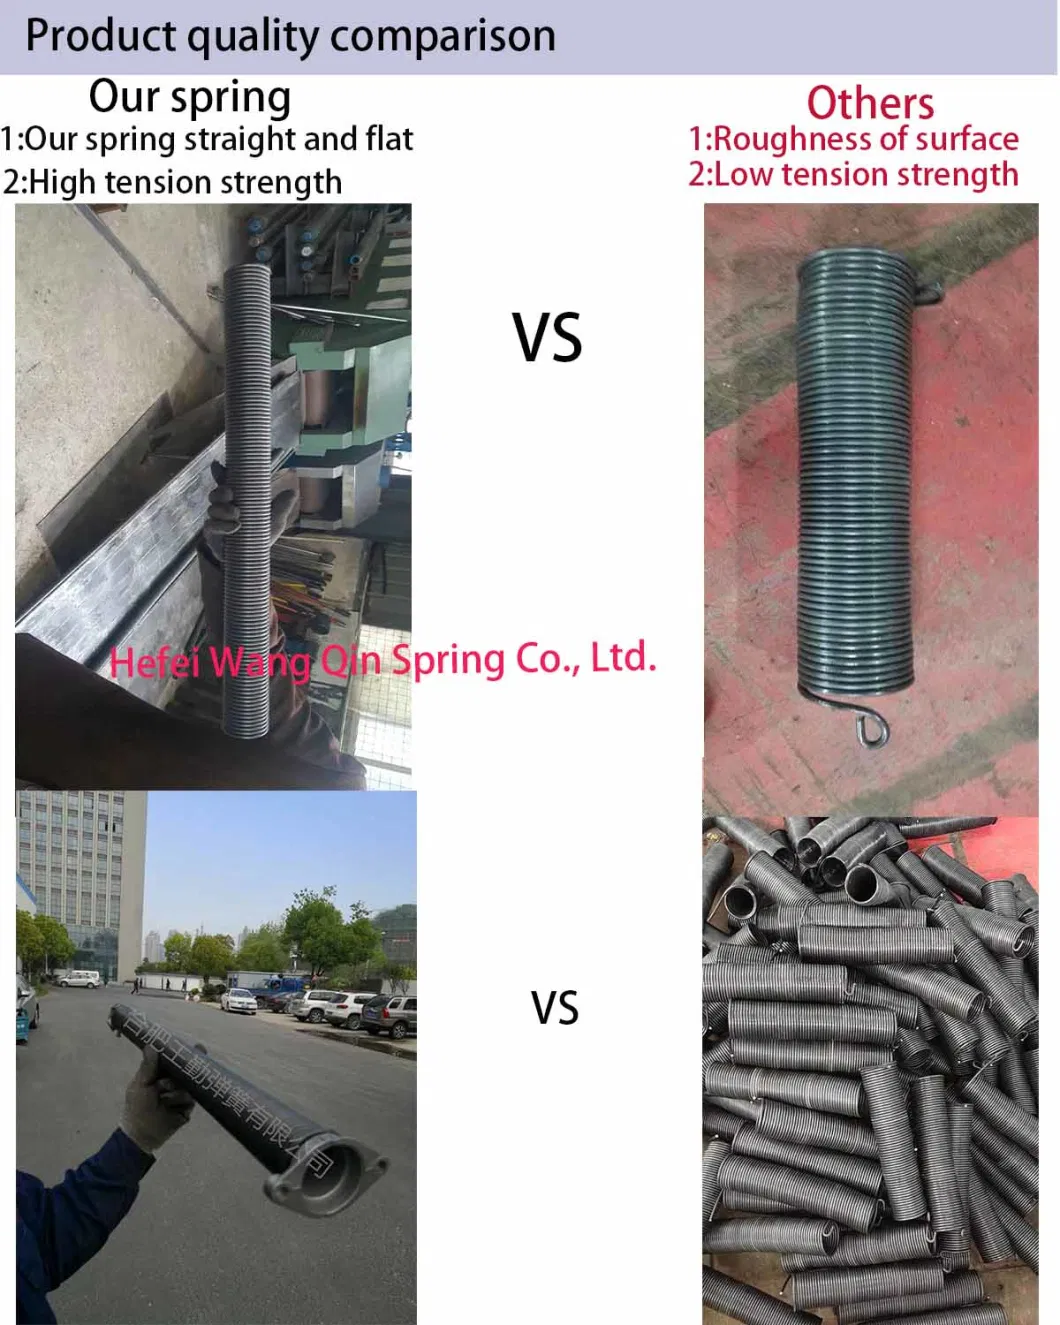 High Tension Strength Roller Garage Extension Springs Used for Industrial Doors